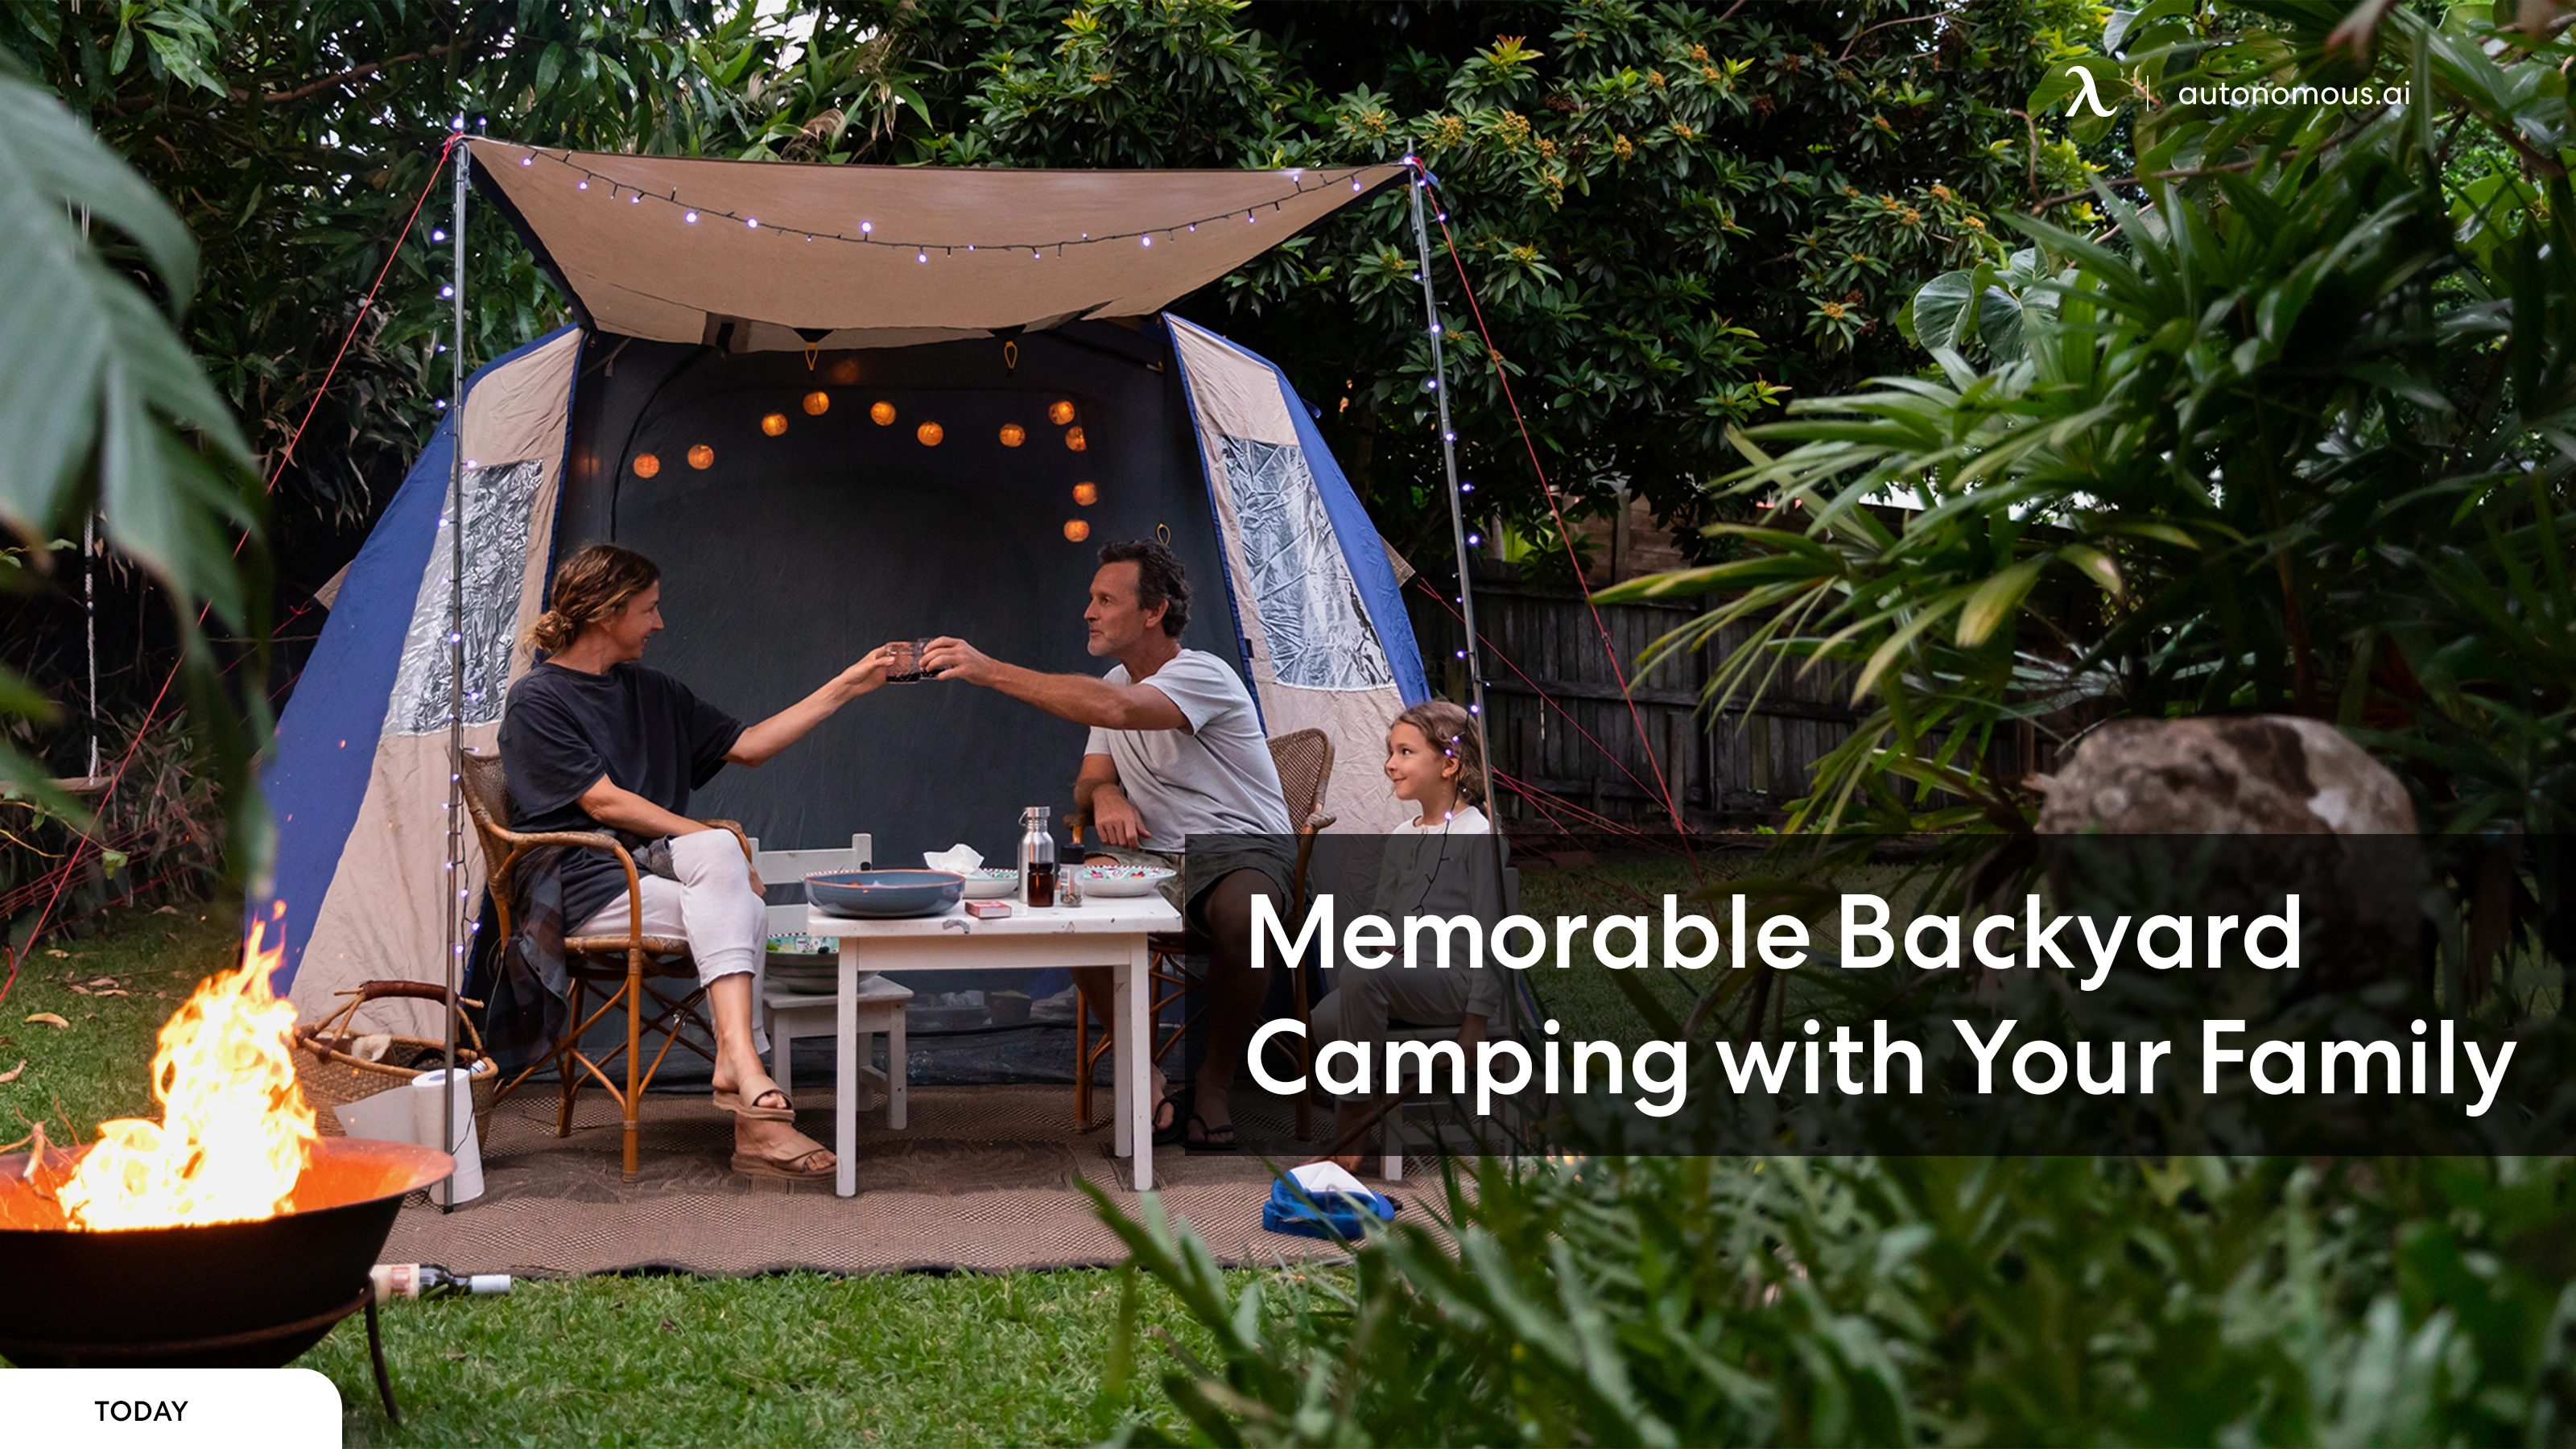 How to Plan a Memorable Backyard Camping with Your Family?